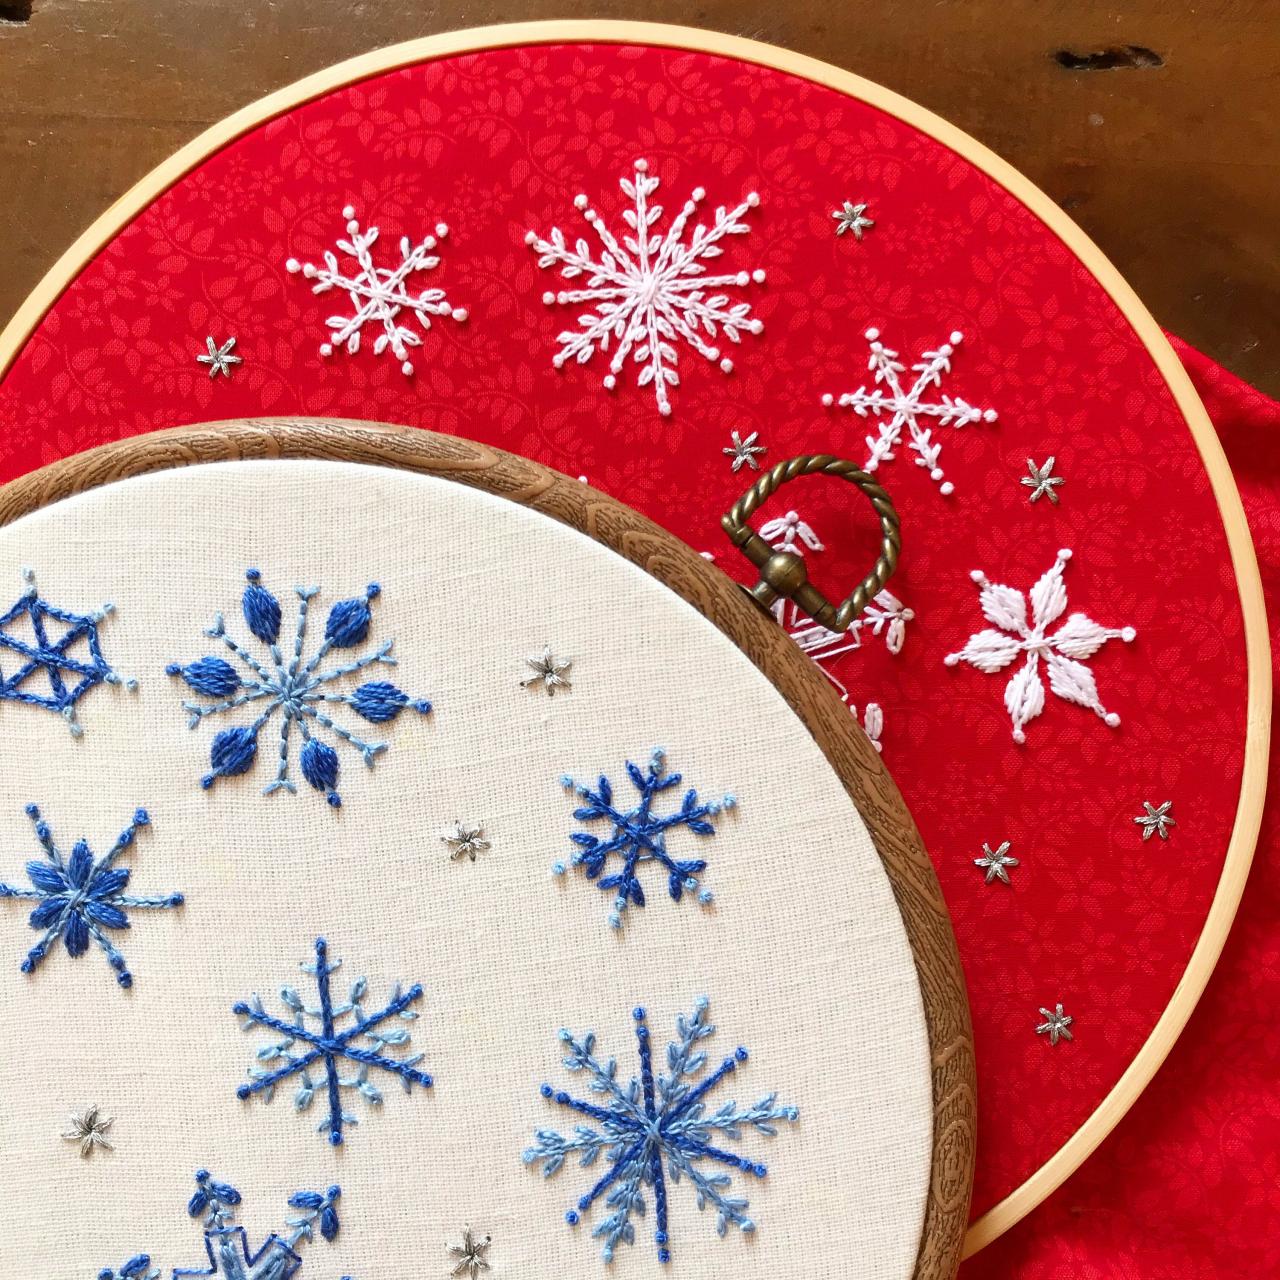 ORIGINAL snowman and snowflakes Christmas winter festive season themed embroidered hoop